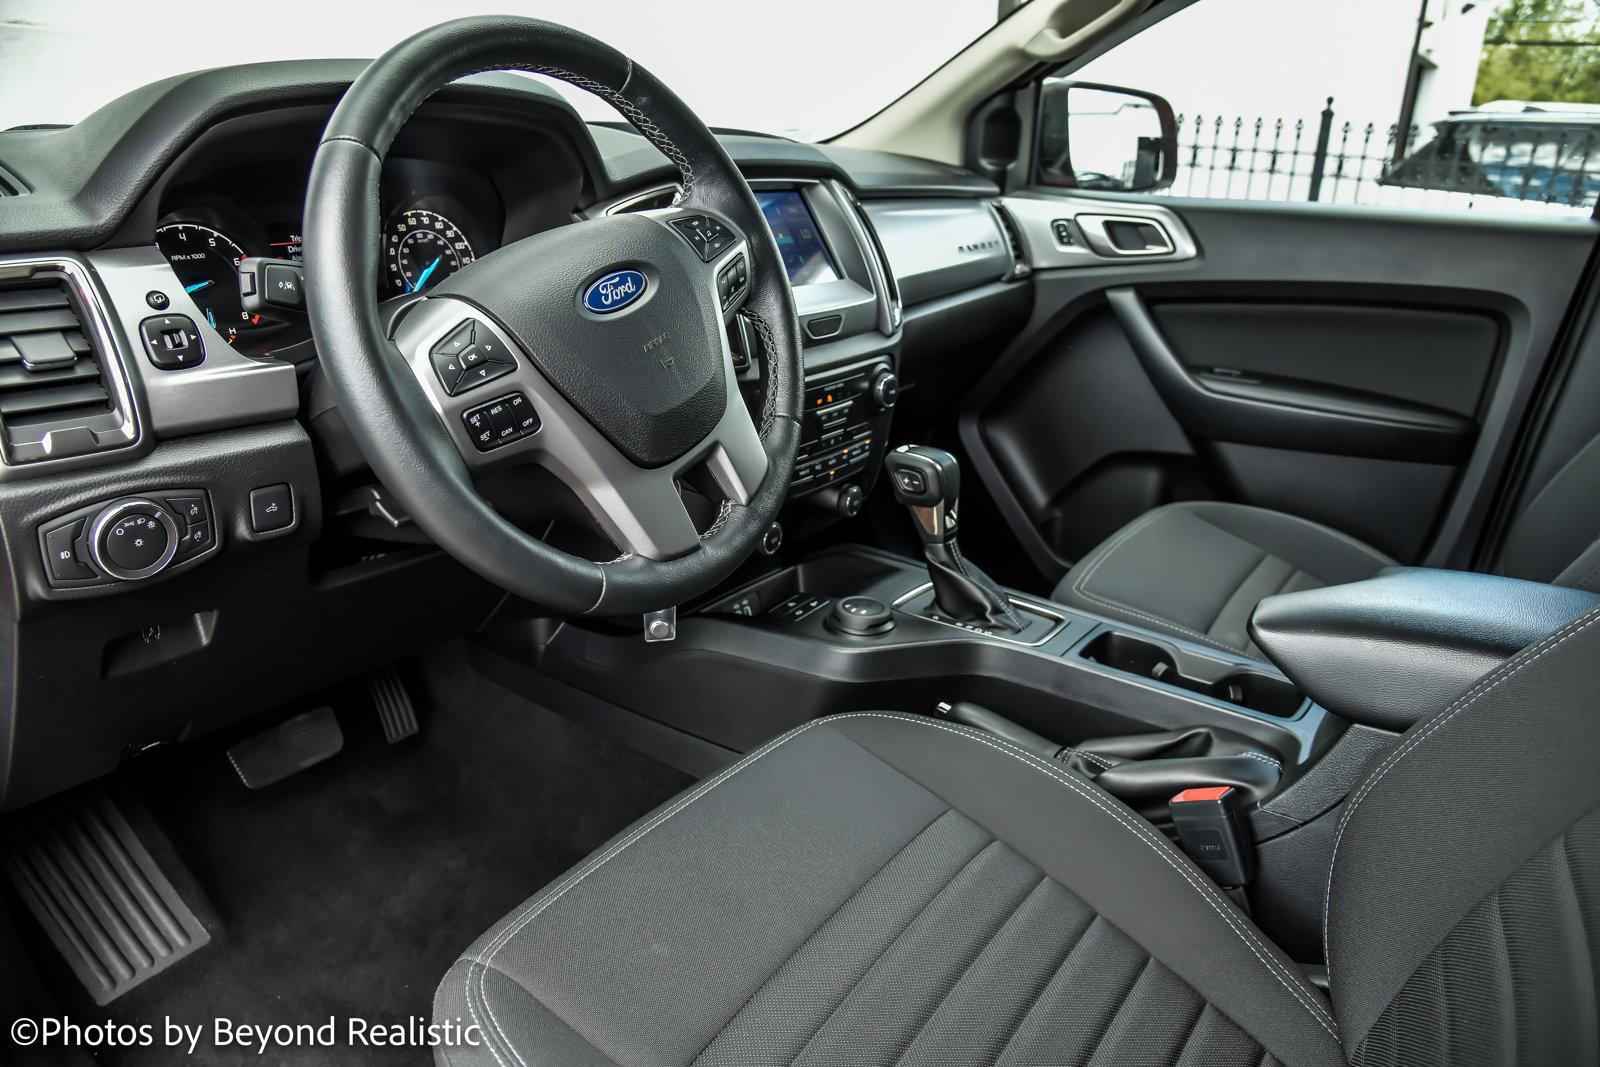 Used 2020 Ford Ranger SuperCrew 4x4 | Downers Grove, IL